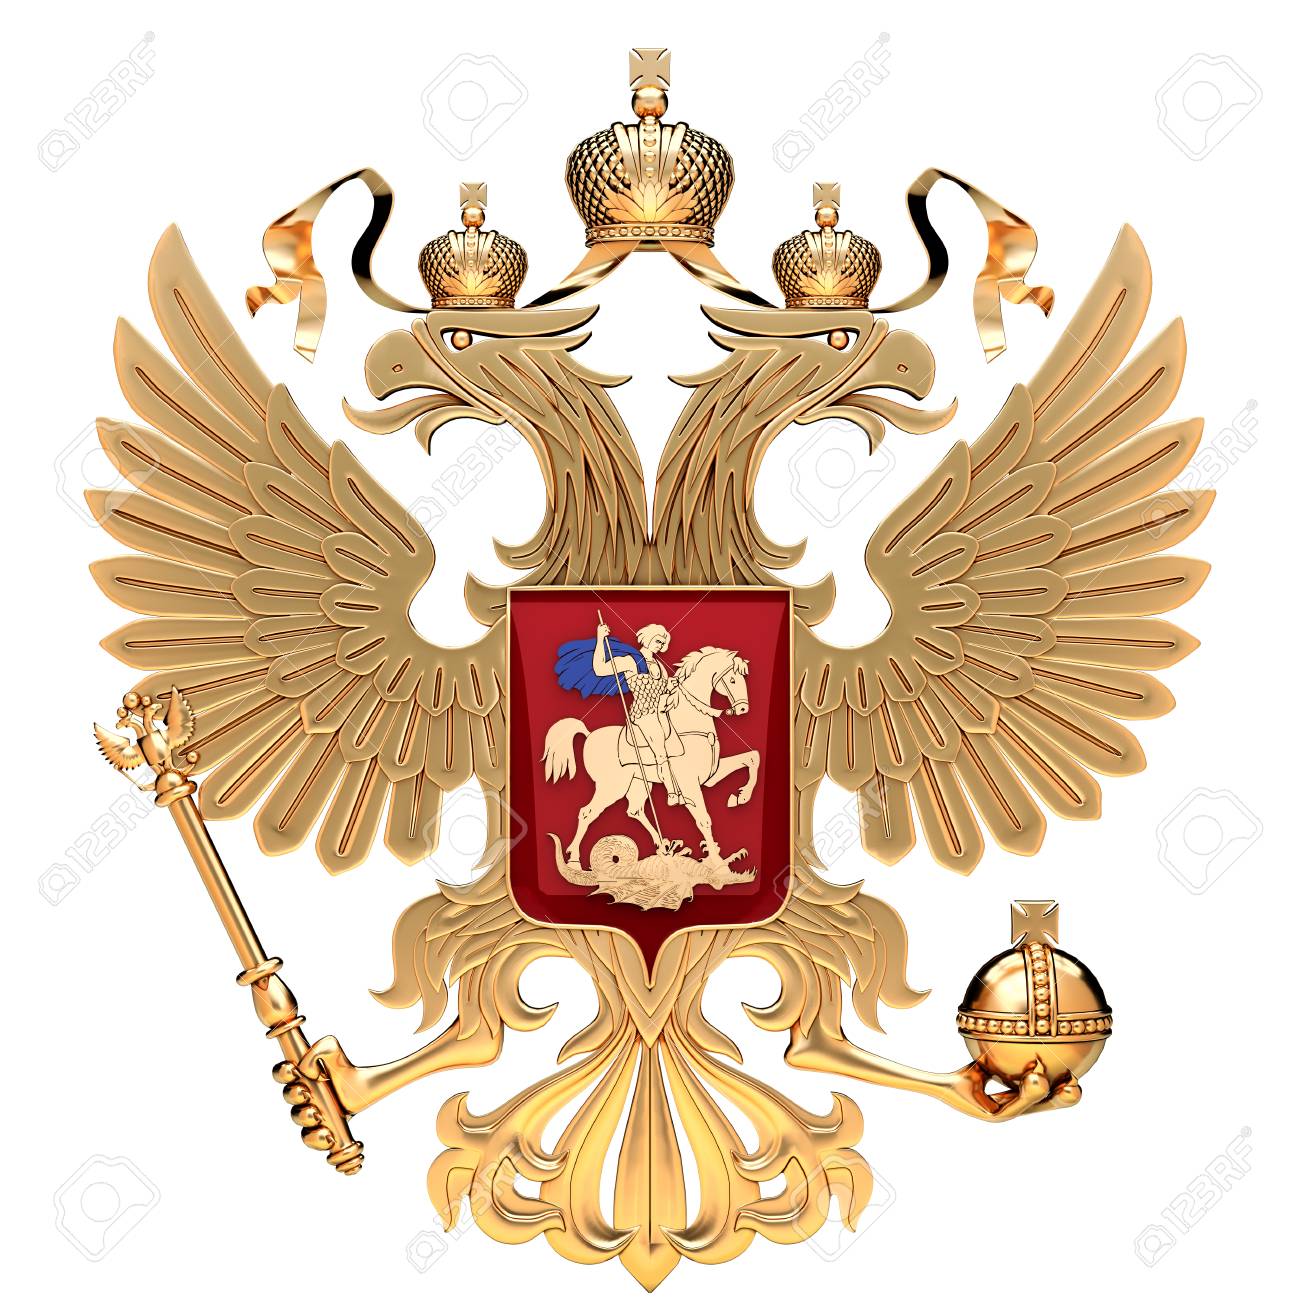 99888459-coat-of-arms-of-russia-with-two-headed-eagle-golden-symbol-of-russian-federation-3d-render-illustrat.jpg